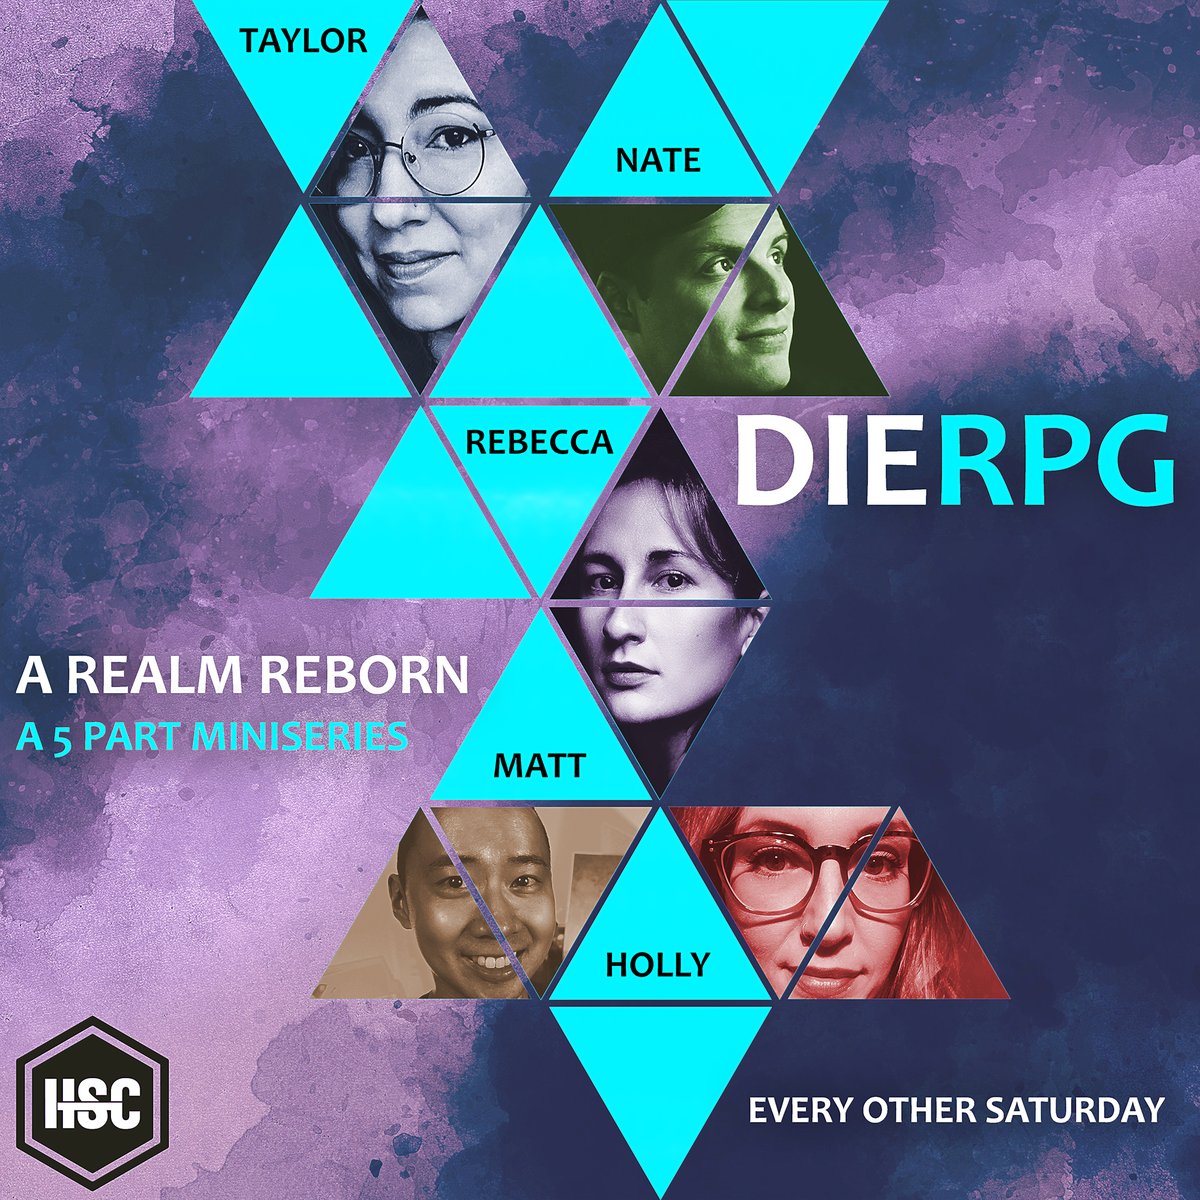 TONIGHT, 8:30PM EST on @HighShelfCLTV Twitch - the finale of #DIERPG! It all comes down to this. A decision must be made. To stay or to go? The fate of the game and world depends on it. #TTRPG @RowanRookDecard